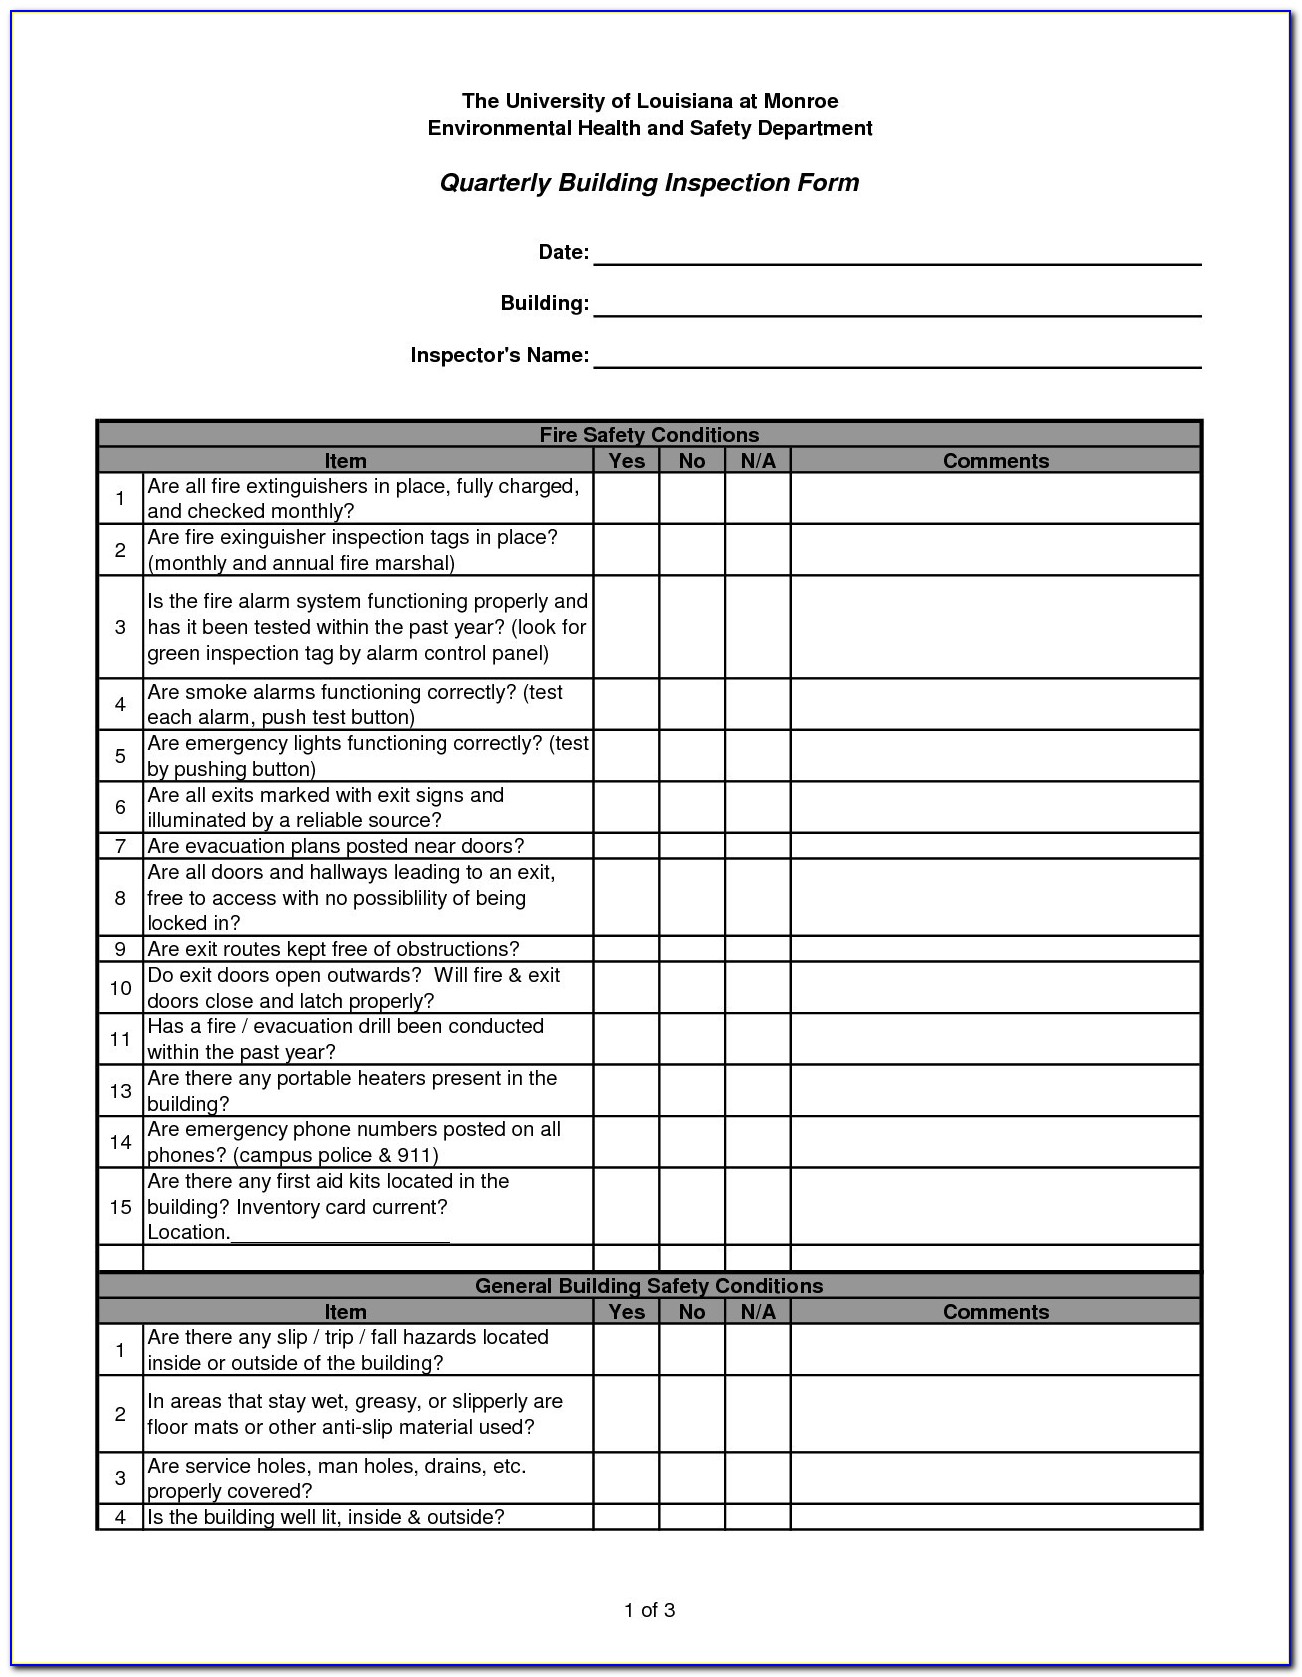 move out inspection checklist for construction contract